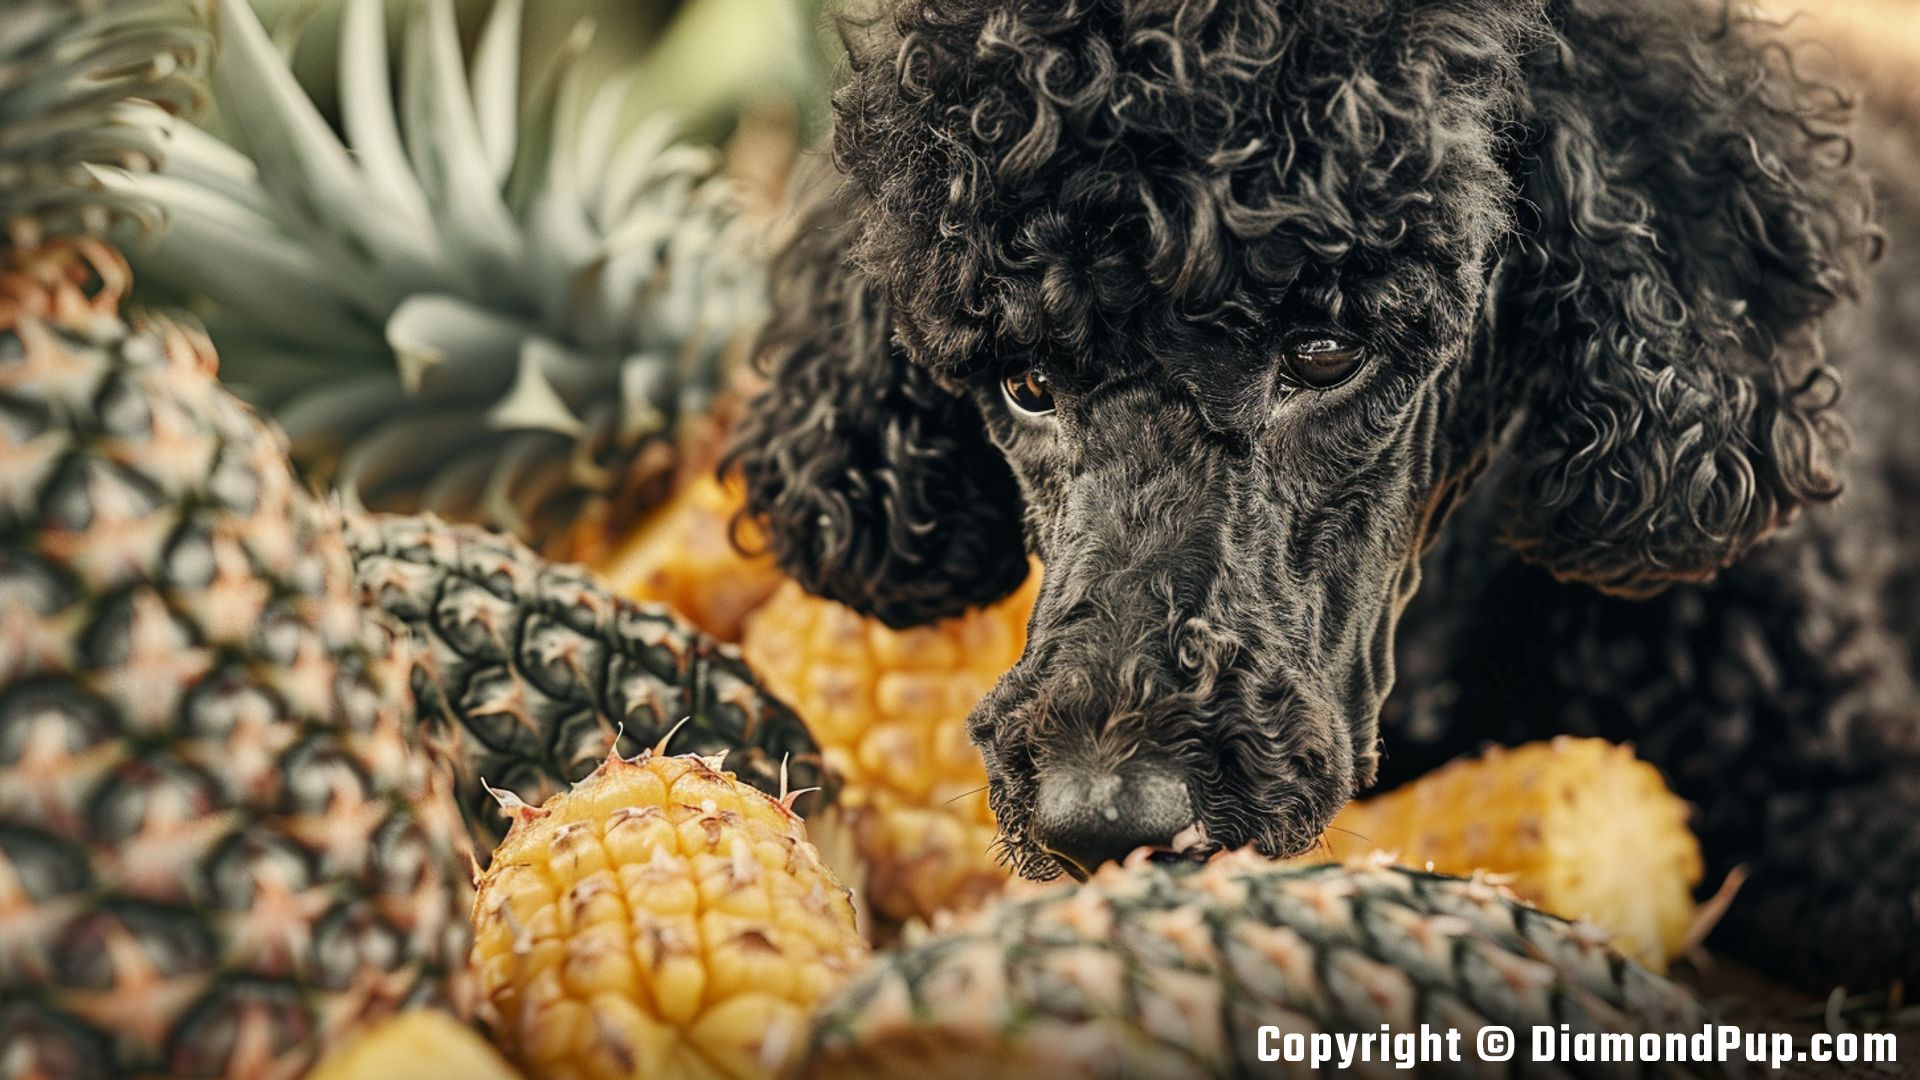 Photo of an Adorable Poodle Eating Pineapple